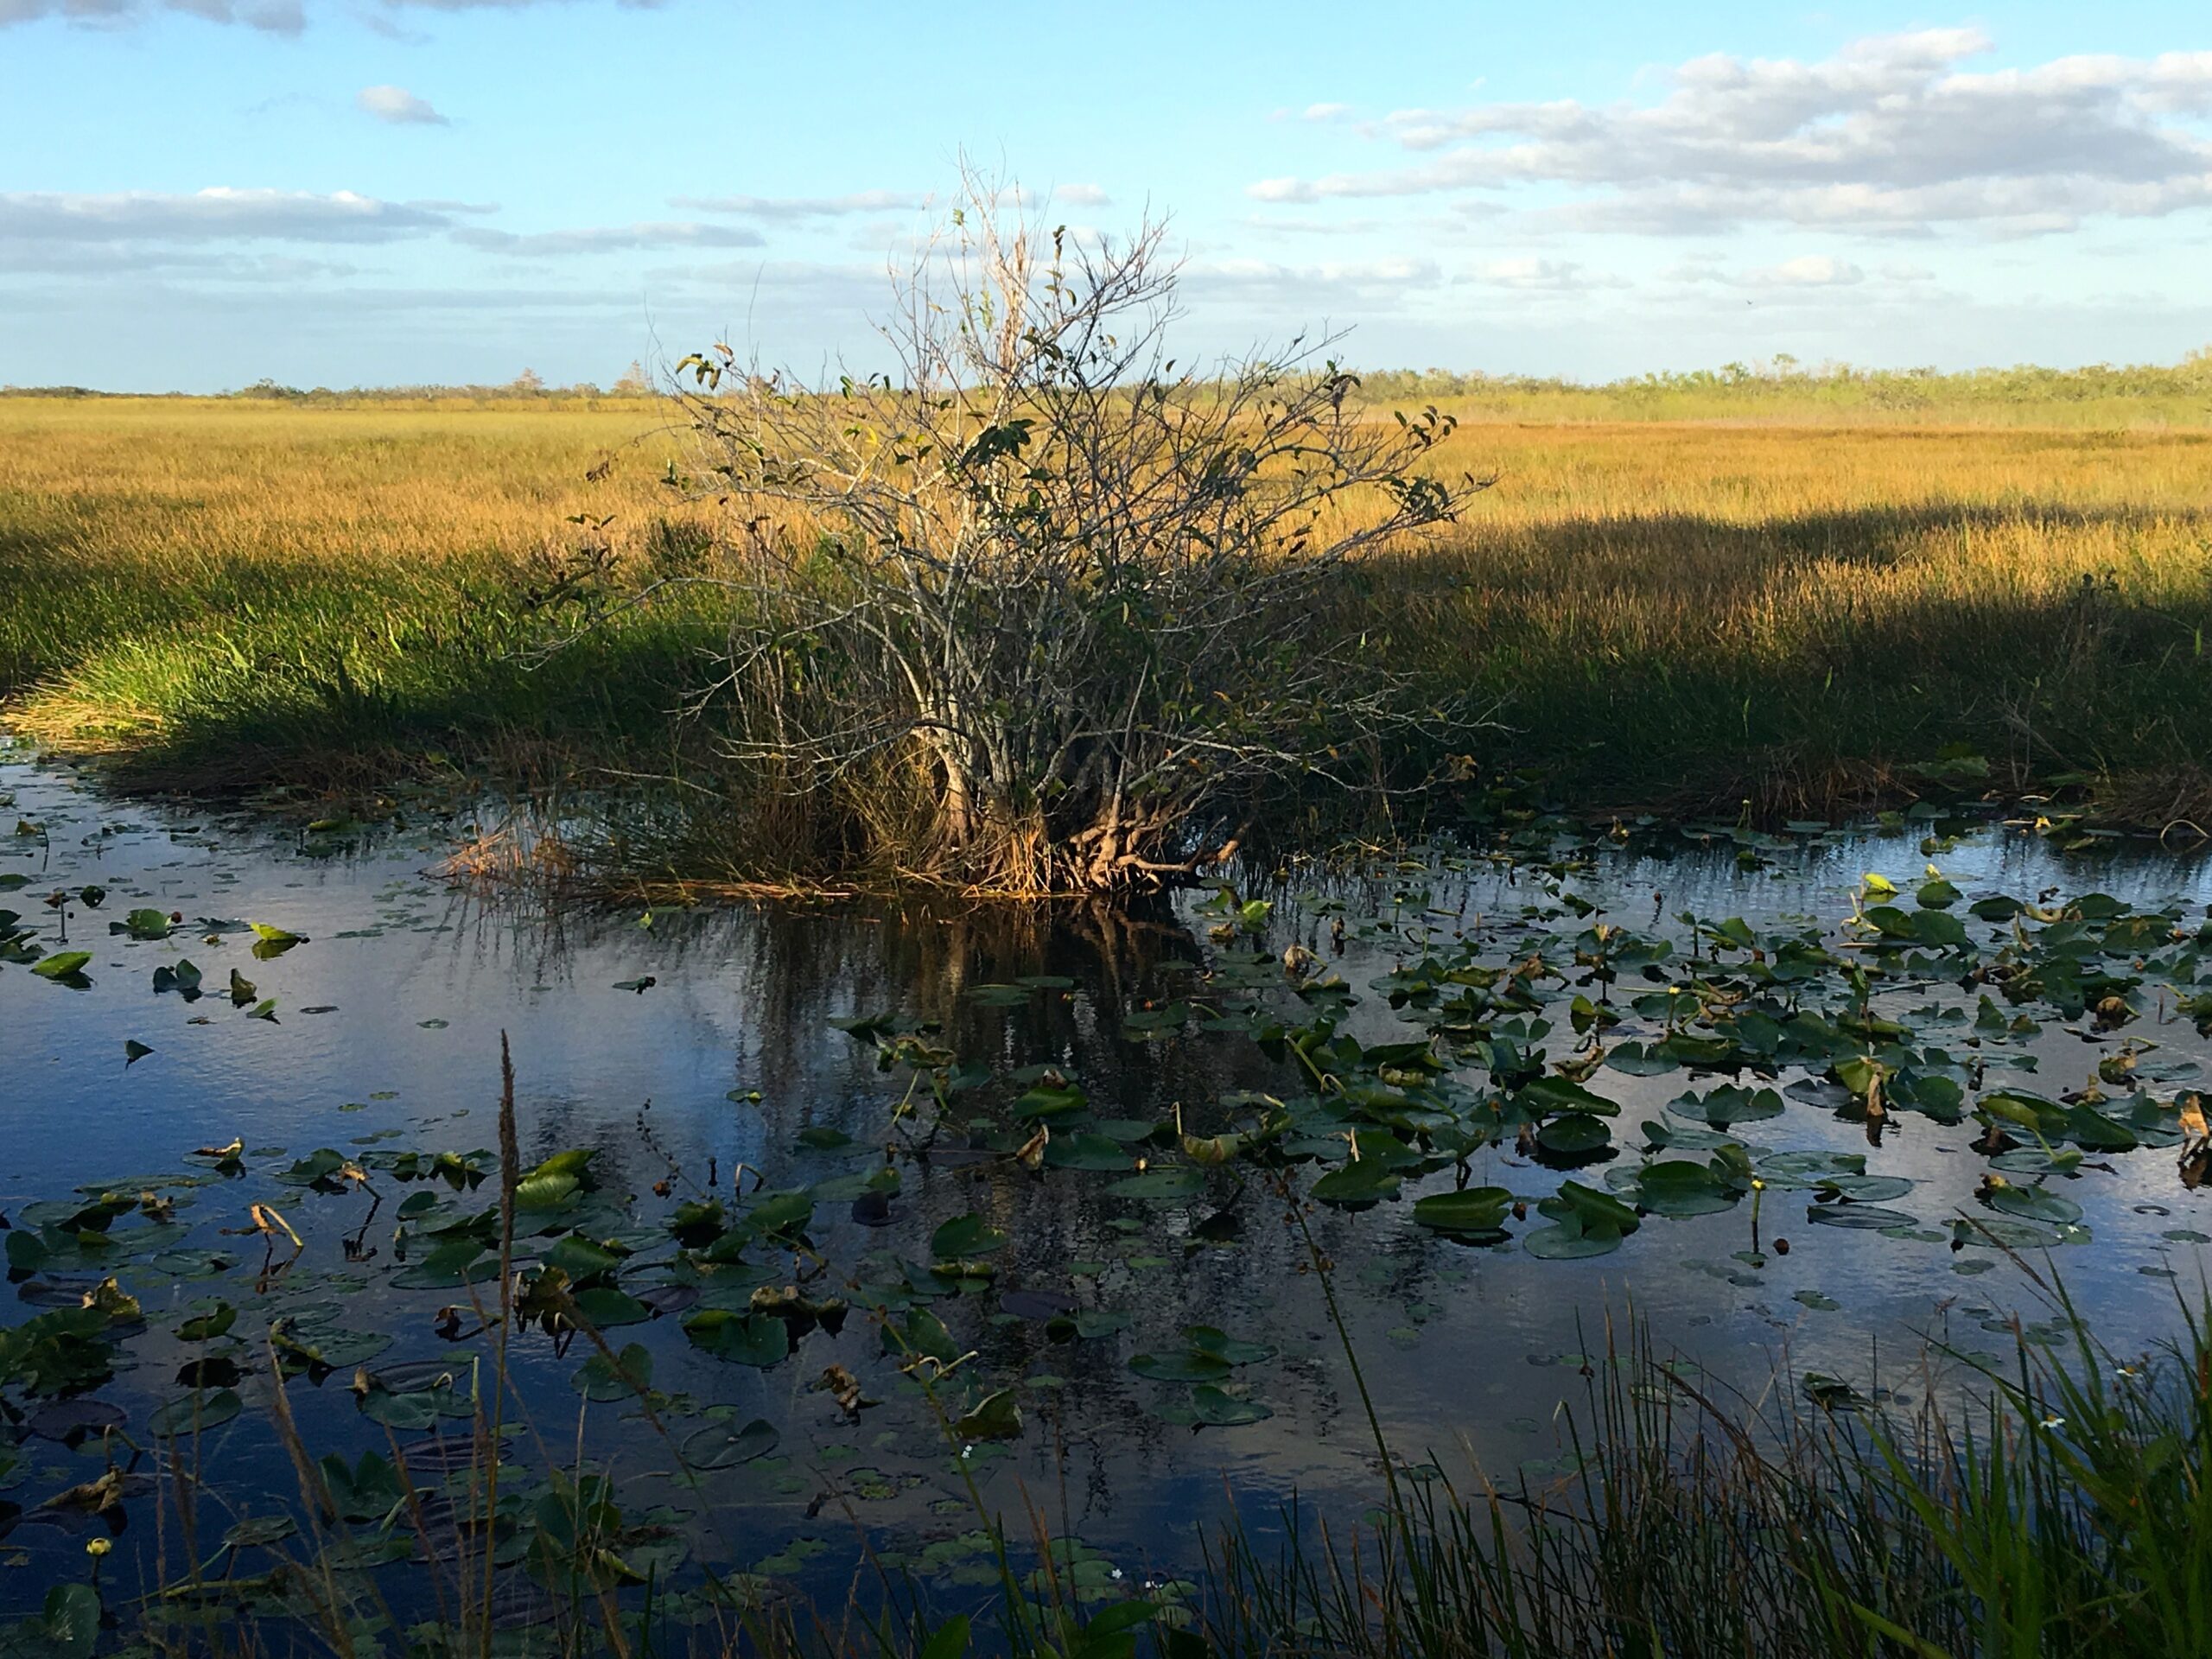 what indian war was fought in the florida everglades